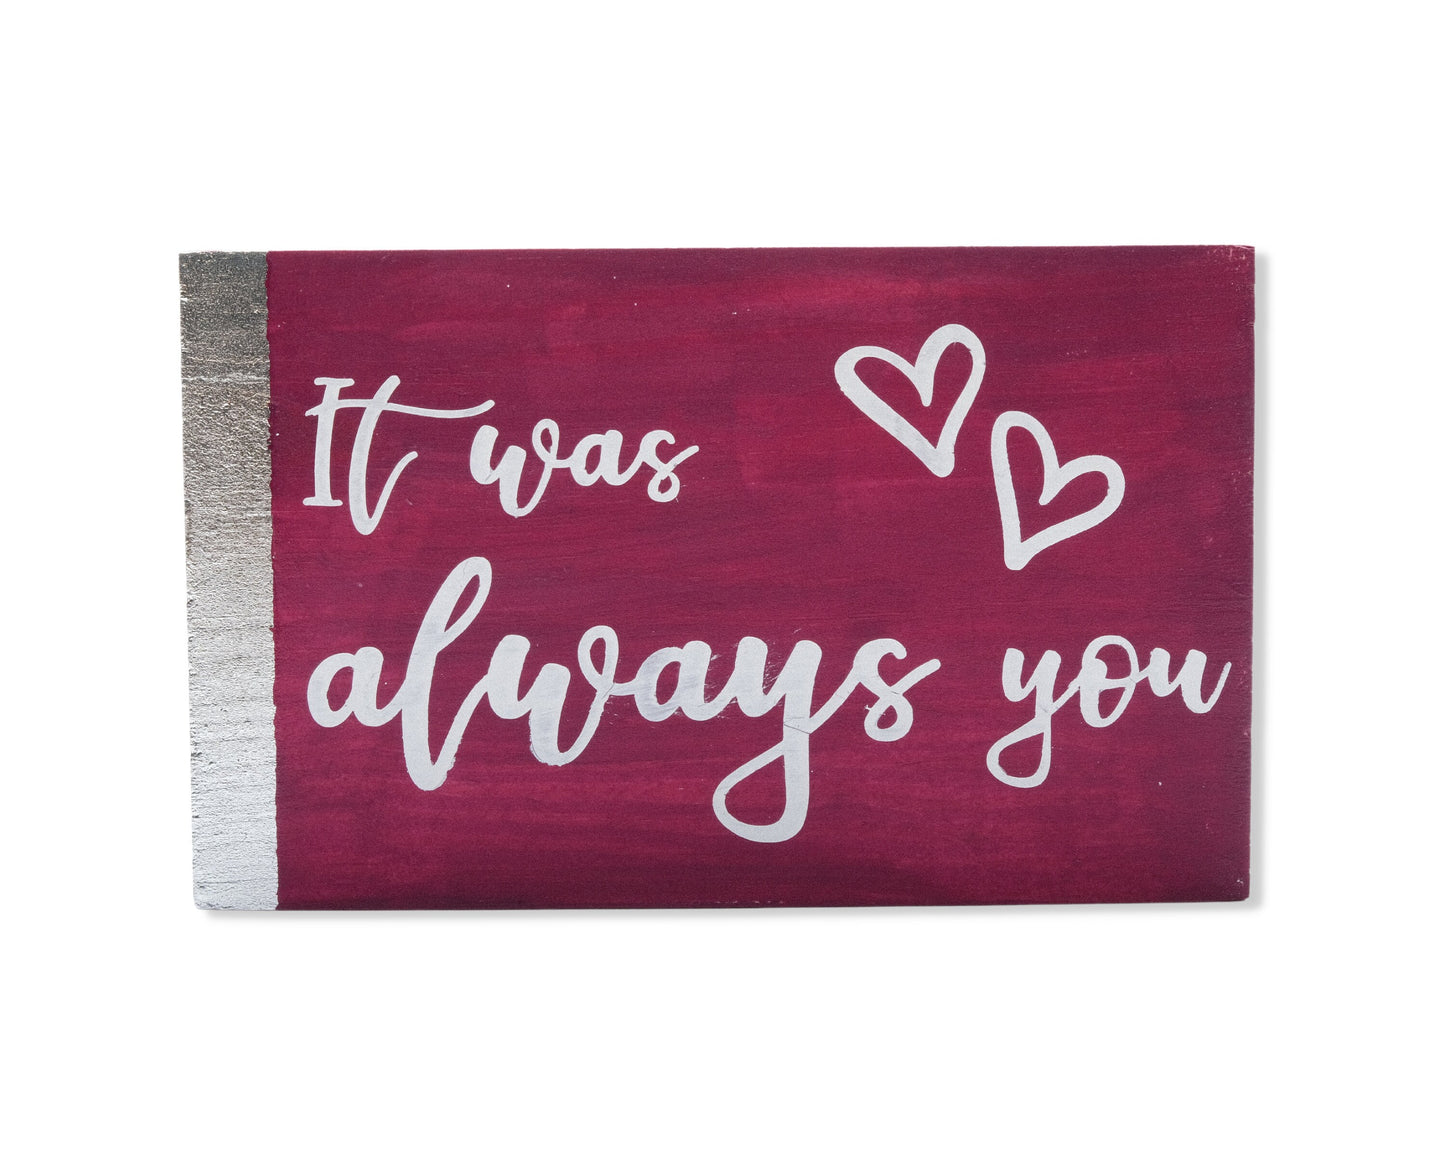 Small freestanding rectangular wooden sign facing straight on. Magenta color, silver vertical border on left side only. White painted message, It was always you, with two heart outlines in top right corner. Studio style photo on white background.